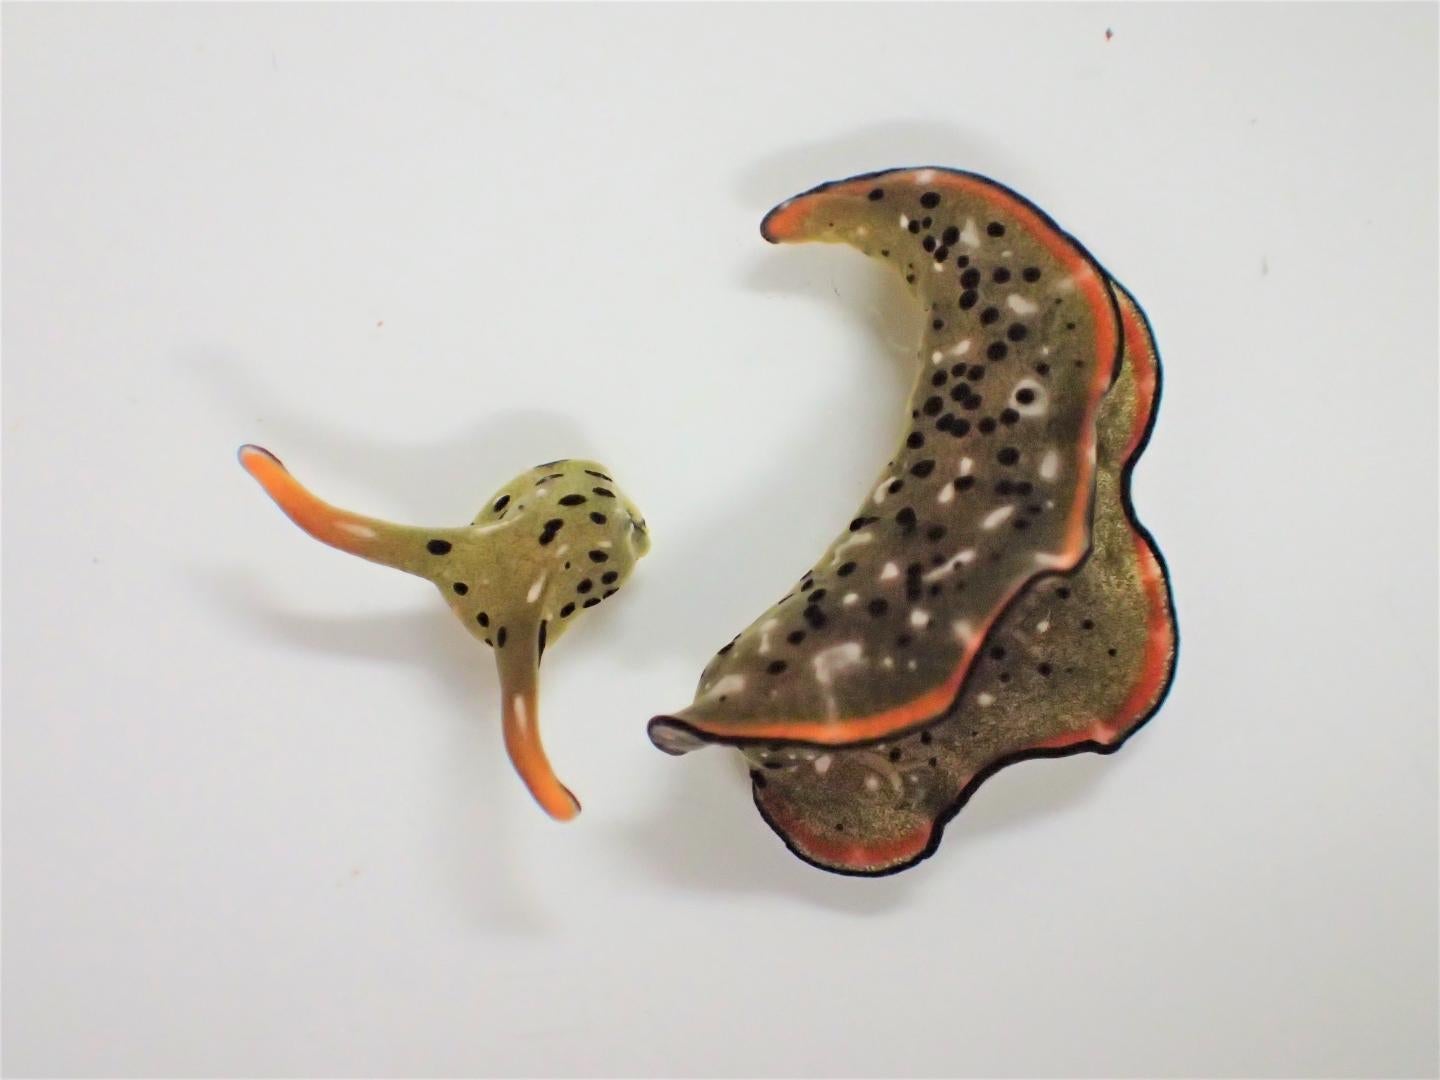 This Sea Slug Can Chop Off Its Head and Grow an Entire New Body--Twice - Scientific American
